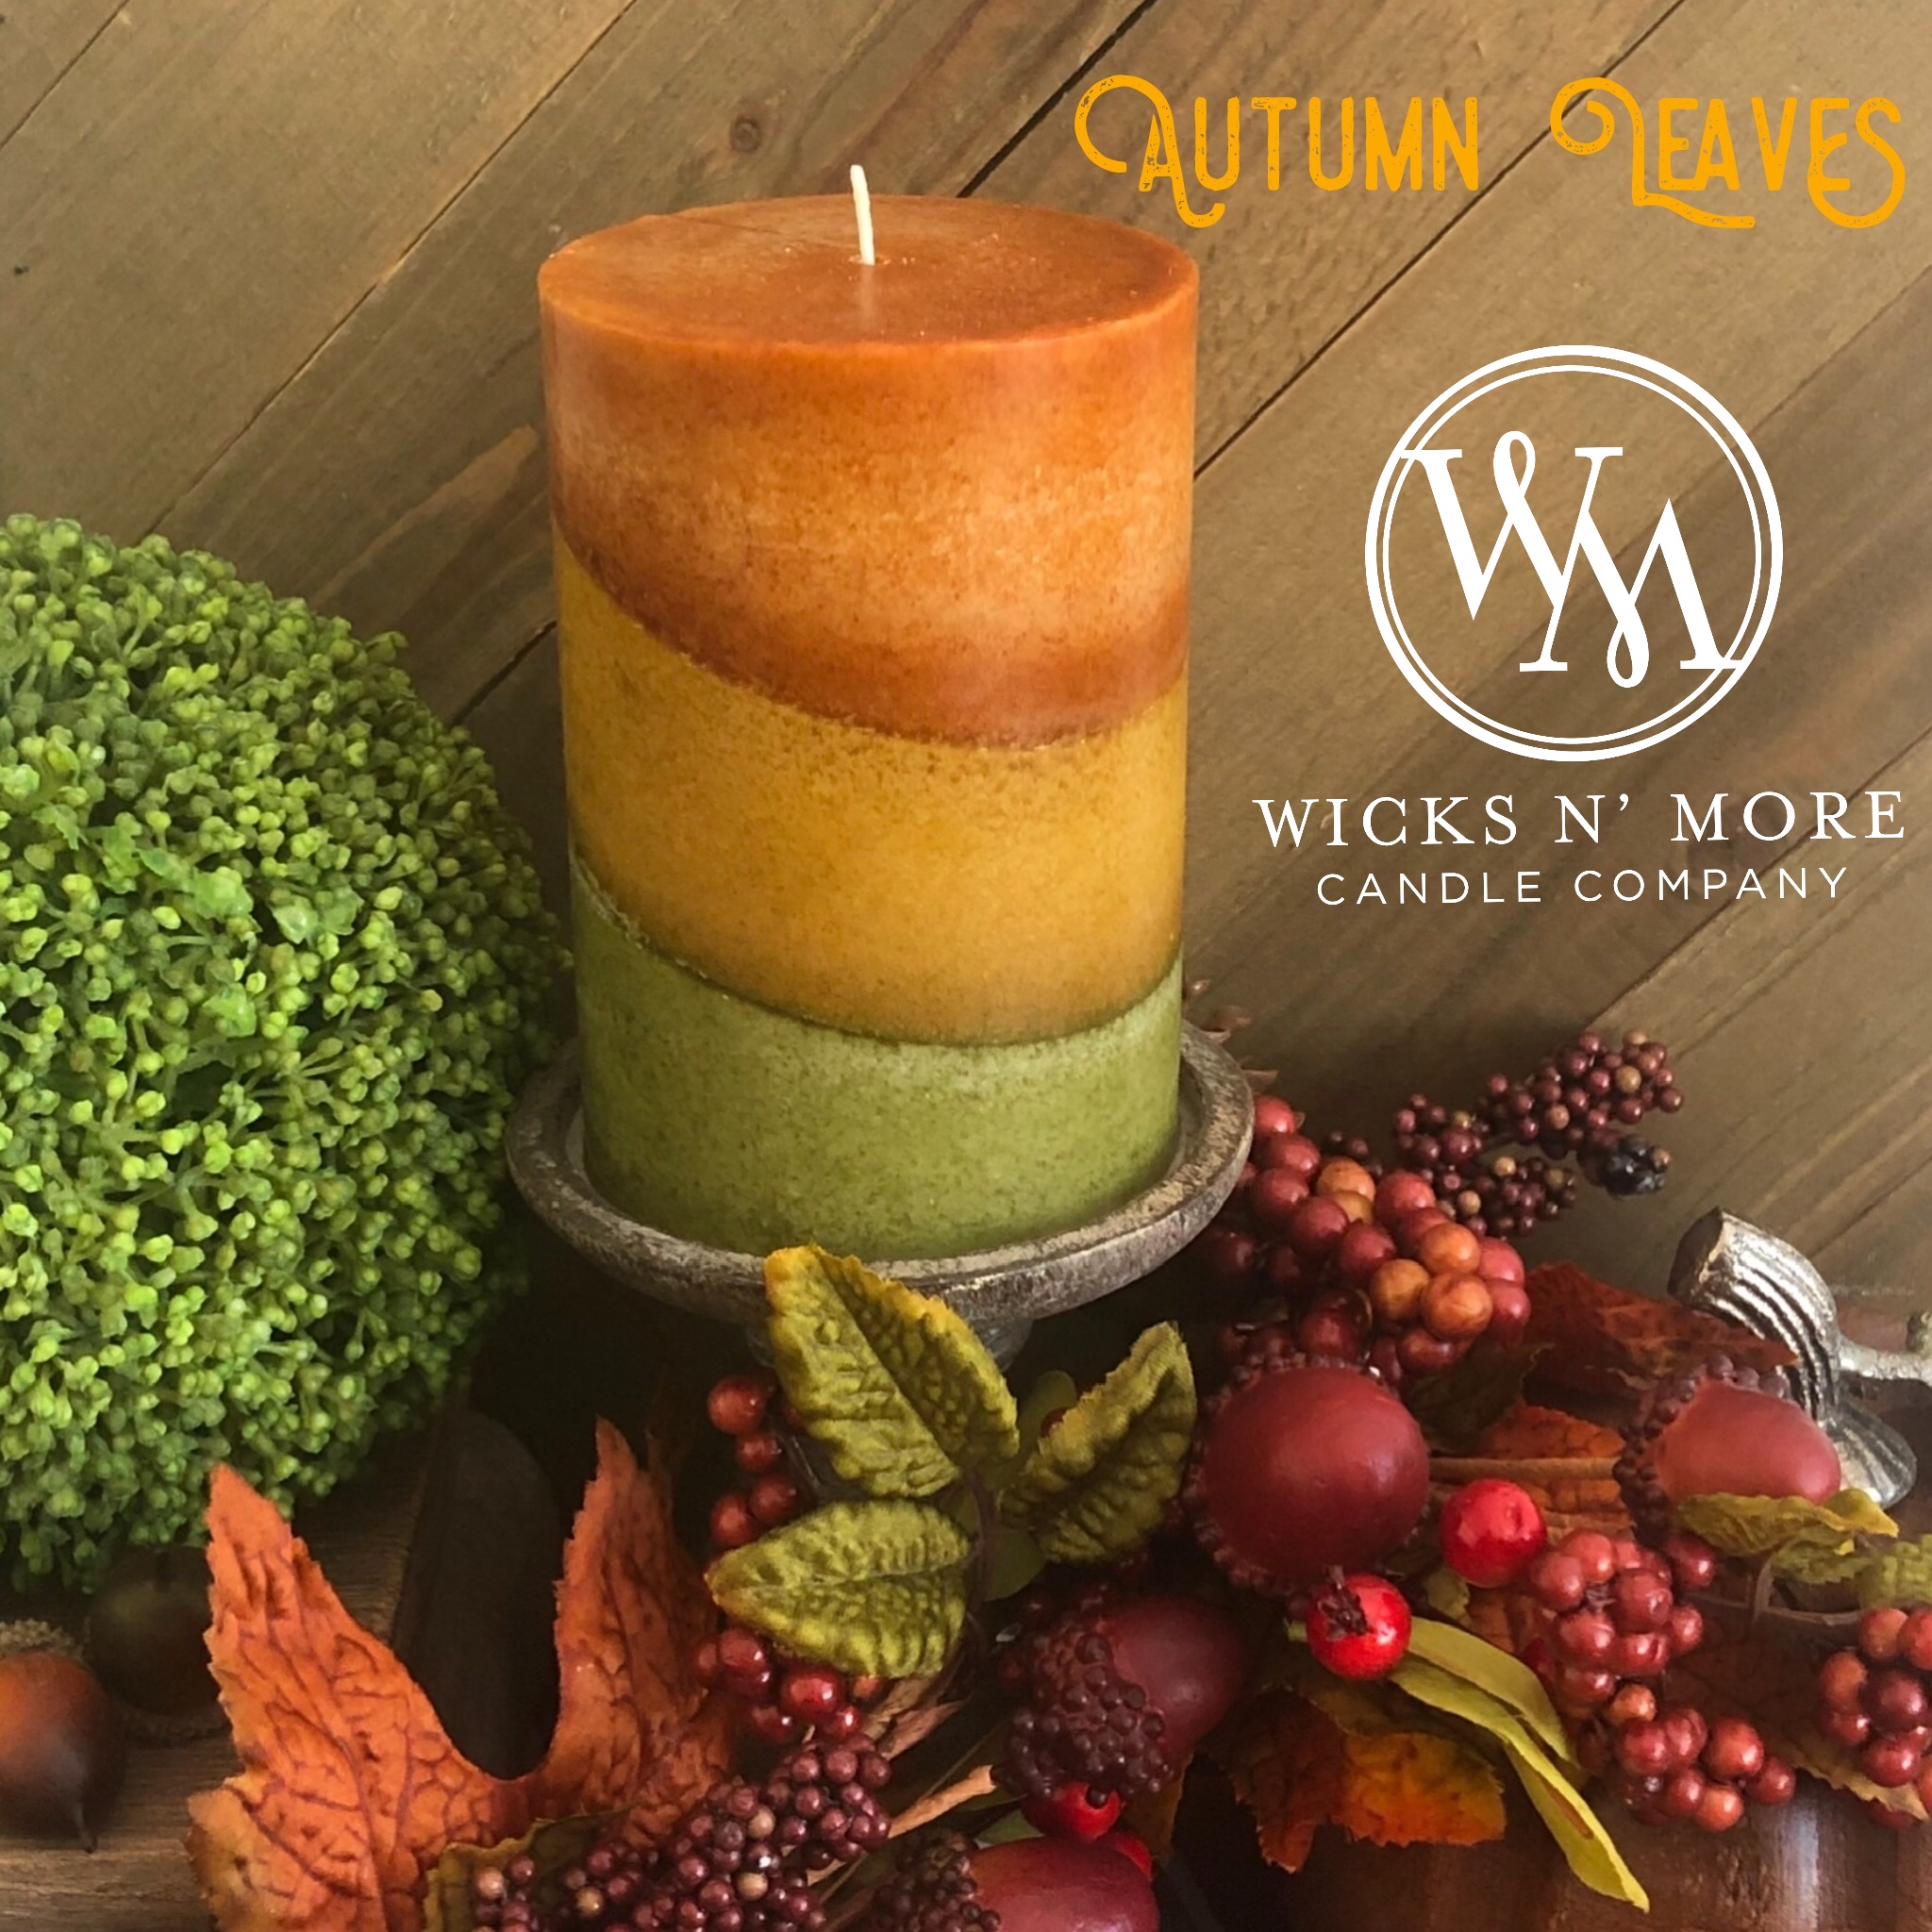 Autumn Leaves Candle - Wicks N' More Candle Company